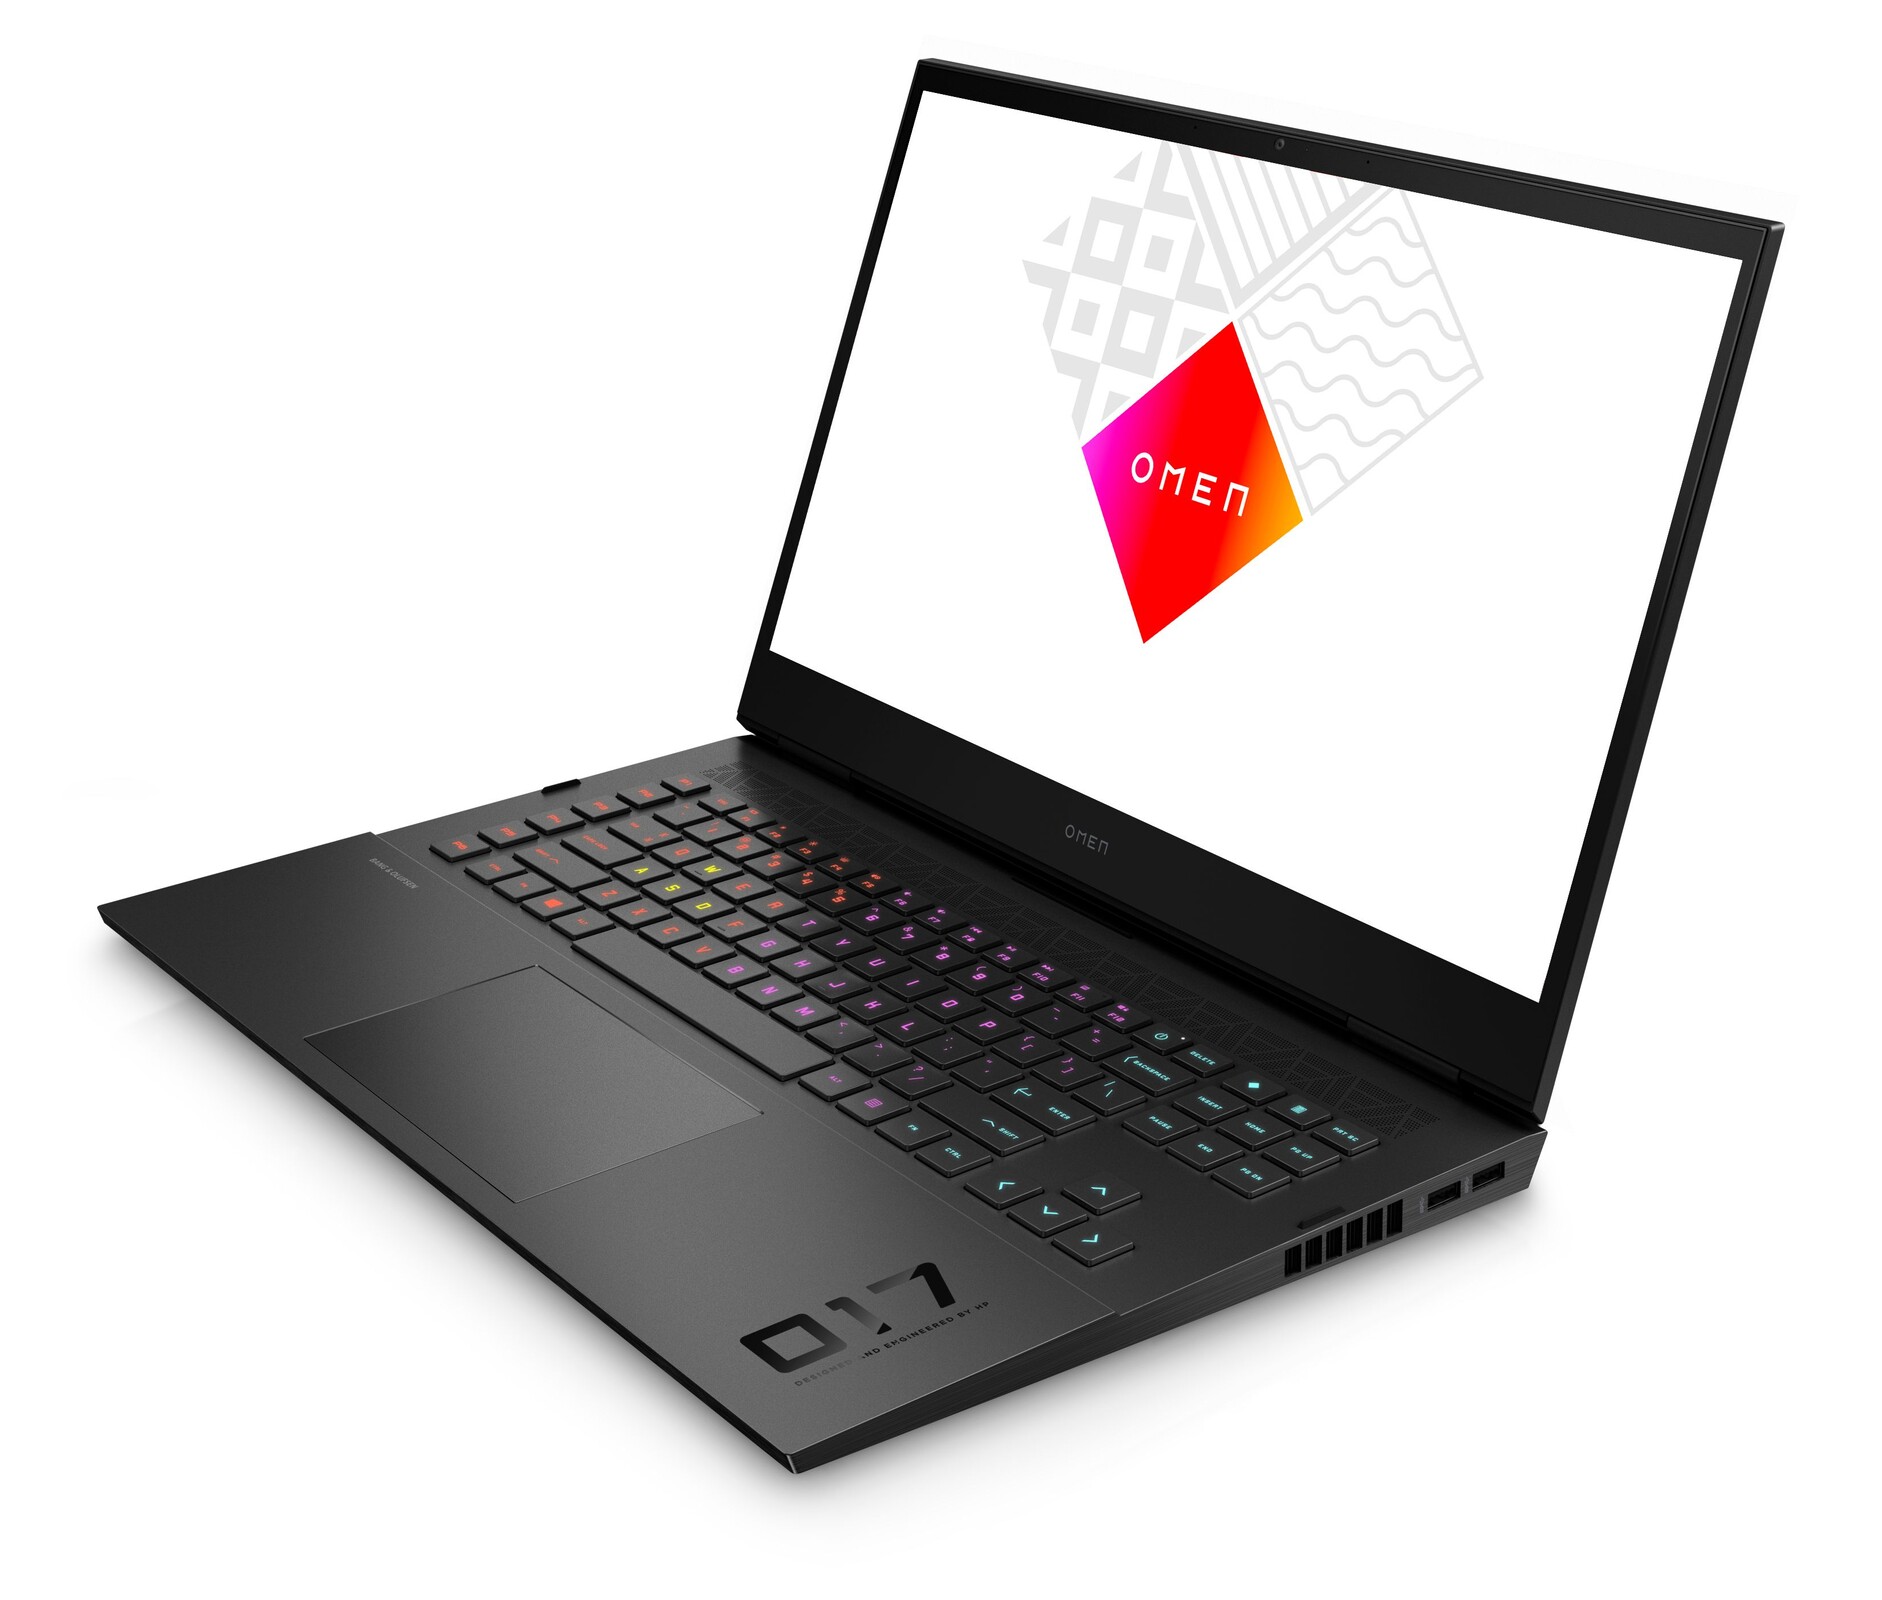 HP Omen 17 (2019) - Full Review and Benchmarks